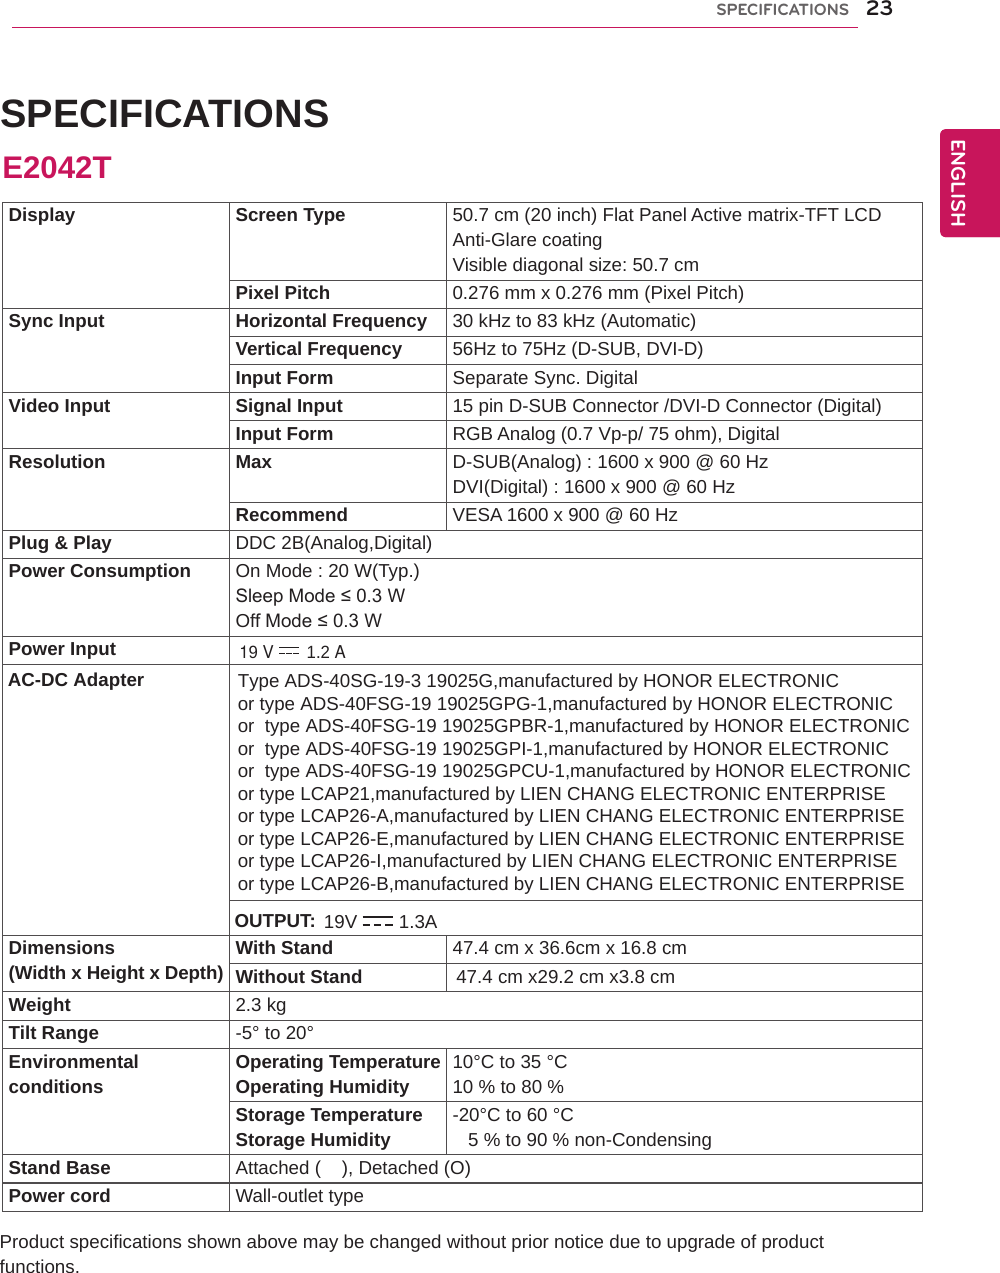 23ENGENGLISHSPECIFICATIONS SPECIFICATIONS Product specifications shown above may be changed without prior notice due to upgrade of product functions.Display Screen Type 50.7 cm (20 inch) Flat Panel Active matrix-TFT LCDAnti-Glare coatingVisible diagonal size: 50.7 cmPixel Pitch 0.276 mm x 0.276 mm (Pixel Pitch)Sync Input Horizontal Frequency 30 kHz to 83 kHz (Automatic)Vertical Frequency 56Hz to 75Hz (D-SUB, DVI-D)Input Form Separate Sync. DigitalVideo Input Signal Input 15 pin D-SUB Connector /DVI-D Connector (Digital)Input Form RGB Analog (0.7 Vp-p/ 75 ohm), DigitalResolution Max D-SUB(Analog) : 1600 x 900 @ 60 HzDVI(Digital) : 1600 x 900 @ 60 HzRecommend VESA 1600 x 900 @ 60 HzPlug &amp; Play DDC 2B(Analog,Digital)Power Consumption On Mode : 20 W(Typ.)Sleep Mode ≤ 0.3 W Off Mode ≤ 0.3 W Power InputDimensions(Width x Height x Depth) With Stand 47.4 cm x 36.6cm x 16.8 cmWithout Stand                  47.4 cm x29.2 cm x3.8 cmWeight 2.3 kgTilt Range -5° to 20°Environmentalconditions Operating TemperatureOperating Humidity 10°C to 35 °C10 % to 80 % Storage TemperatureStorage Humidity -20°C to 60 °C   5 % to 90 % non-CondensingStand Base Attached (    ), Detached (O)Power cord Wall-outlet typeE2042T19 V 1.2 A AC-DC Adapter Type ADS-40SG-19-3 19025G,manufactured by HONOR ELECTRONICor type ADS-40FSG-19 19025GPG-1,manufactured by HONOR ELECTRONICor  type ADS-40FSG-19 19025GPBR-1,manufactured by HONOR ELECTRONICor  type ADS-40FSG-19 19025GPI-1,manufactured by HONOR ELECTRONICor  type ADS-40FSG-19 19025GPCU-1,manufactured by HONOR ELECTRONICor type LCAP21,manufactured by LIEN CHANG ELECTRONIC ENTERPRISEor type LCAP26-A,manufactured by LIEN CHANG ELECTRONIC ENTERPRISEor type LCAP26-E,manufactured by LIEN CHANG ELECTRONIC ENTERPRISEor type LCAP26-I,manufactured by LIEN CHANG ELECTRONIC ENTERPRISEor type LCAP26-B,manufactured by LIEN CHANG ELECTRONIC ENTERPRISE OUTPUT: 19V 1.3A